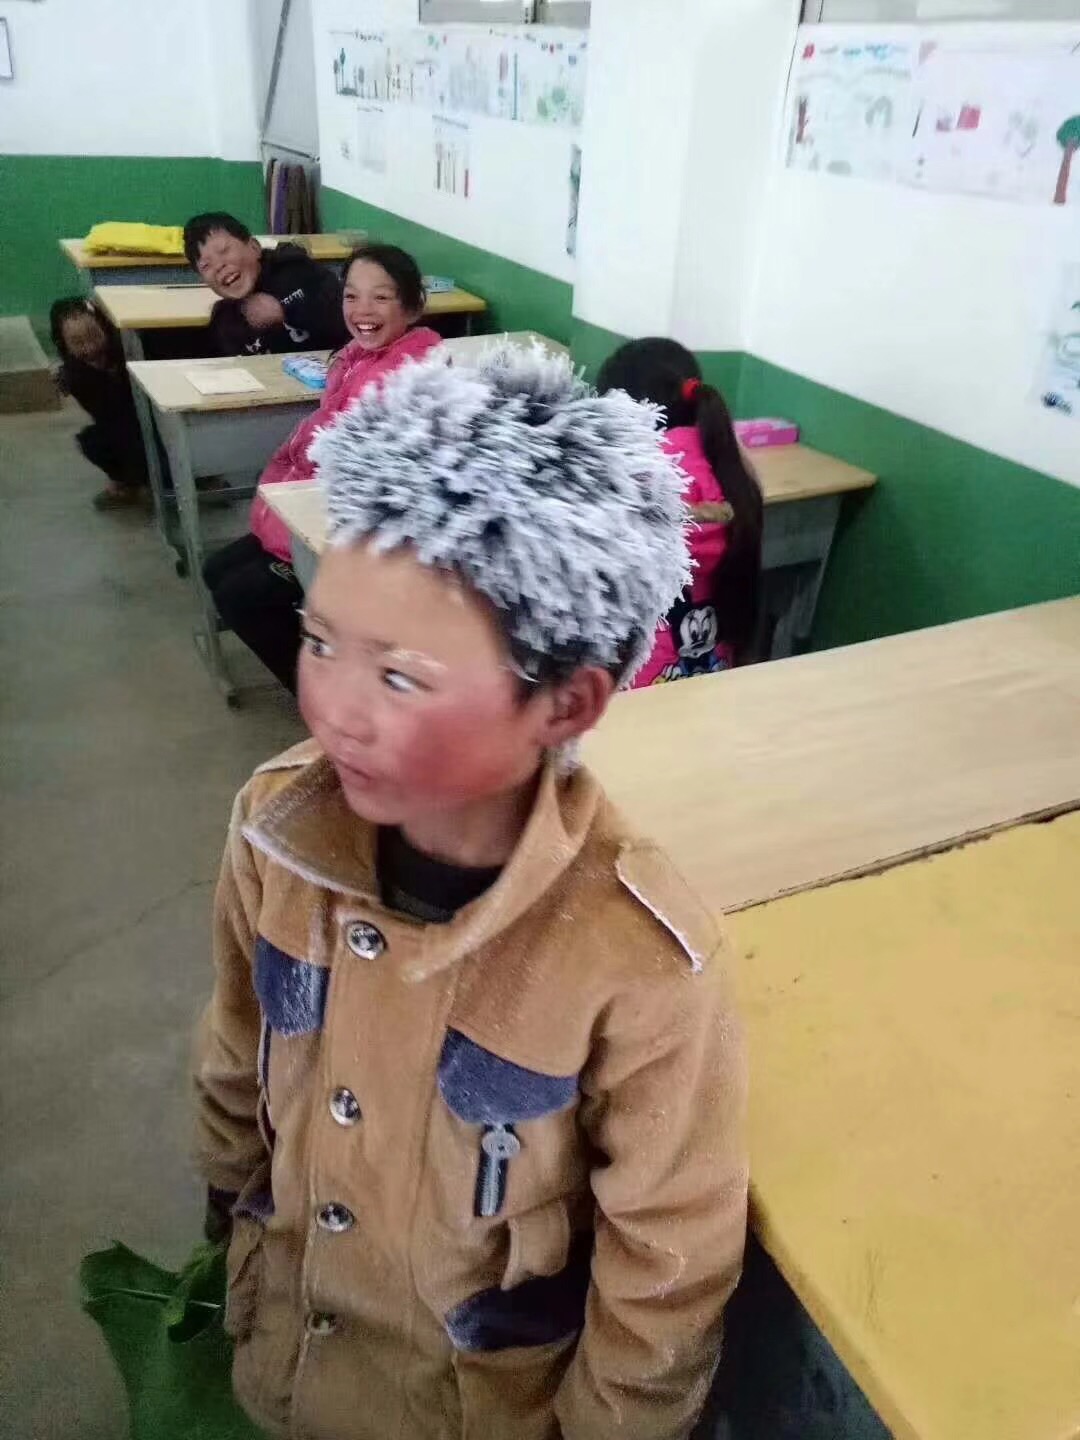 Snow Boy goes Viral in China